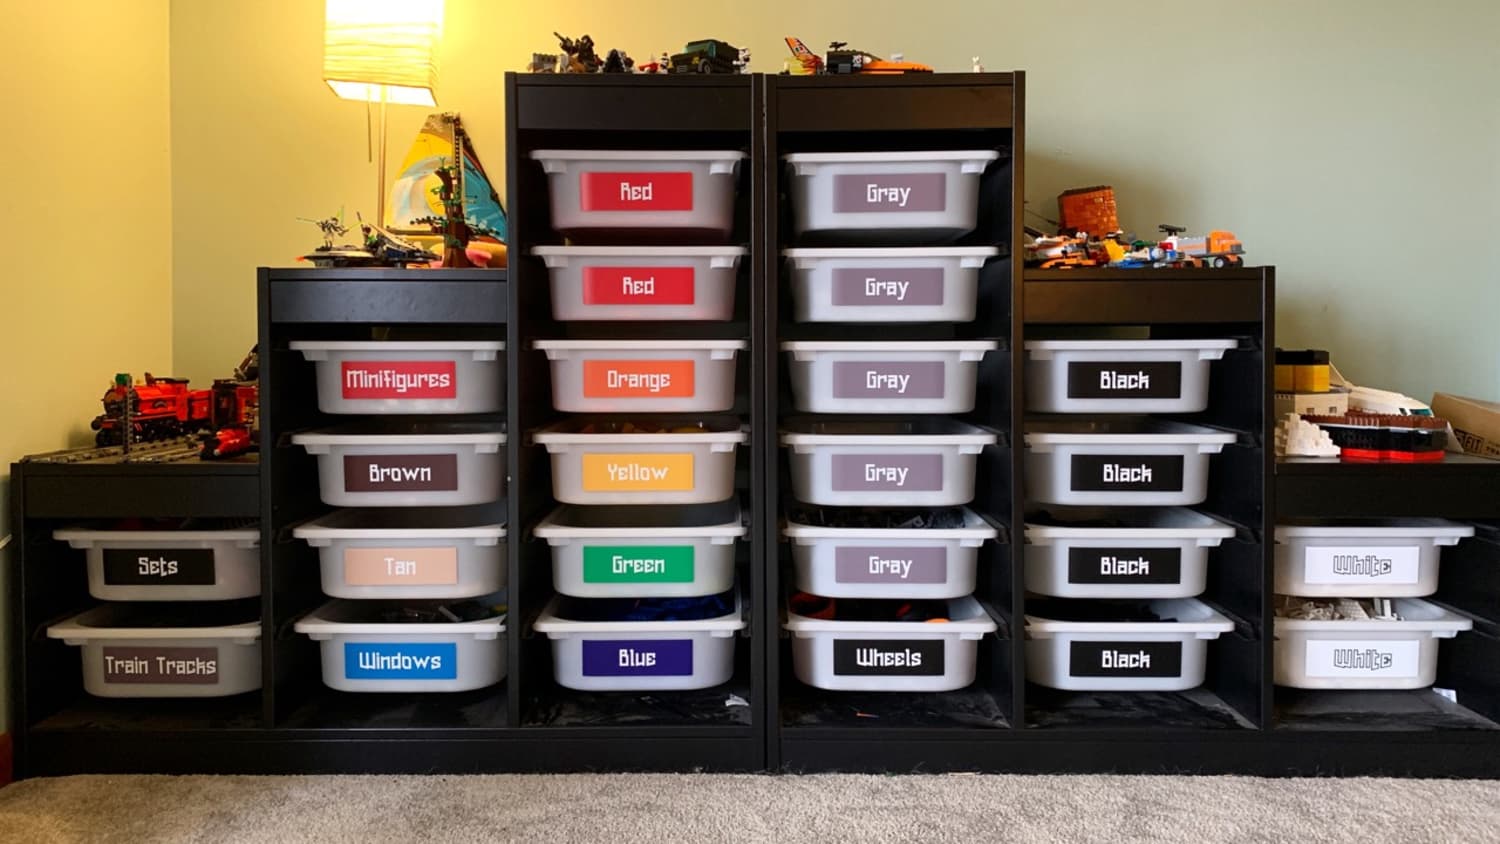 Small LEGO Storage - This Simple Home